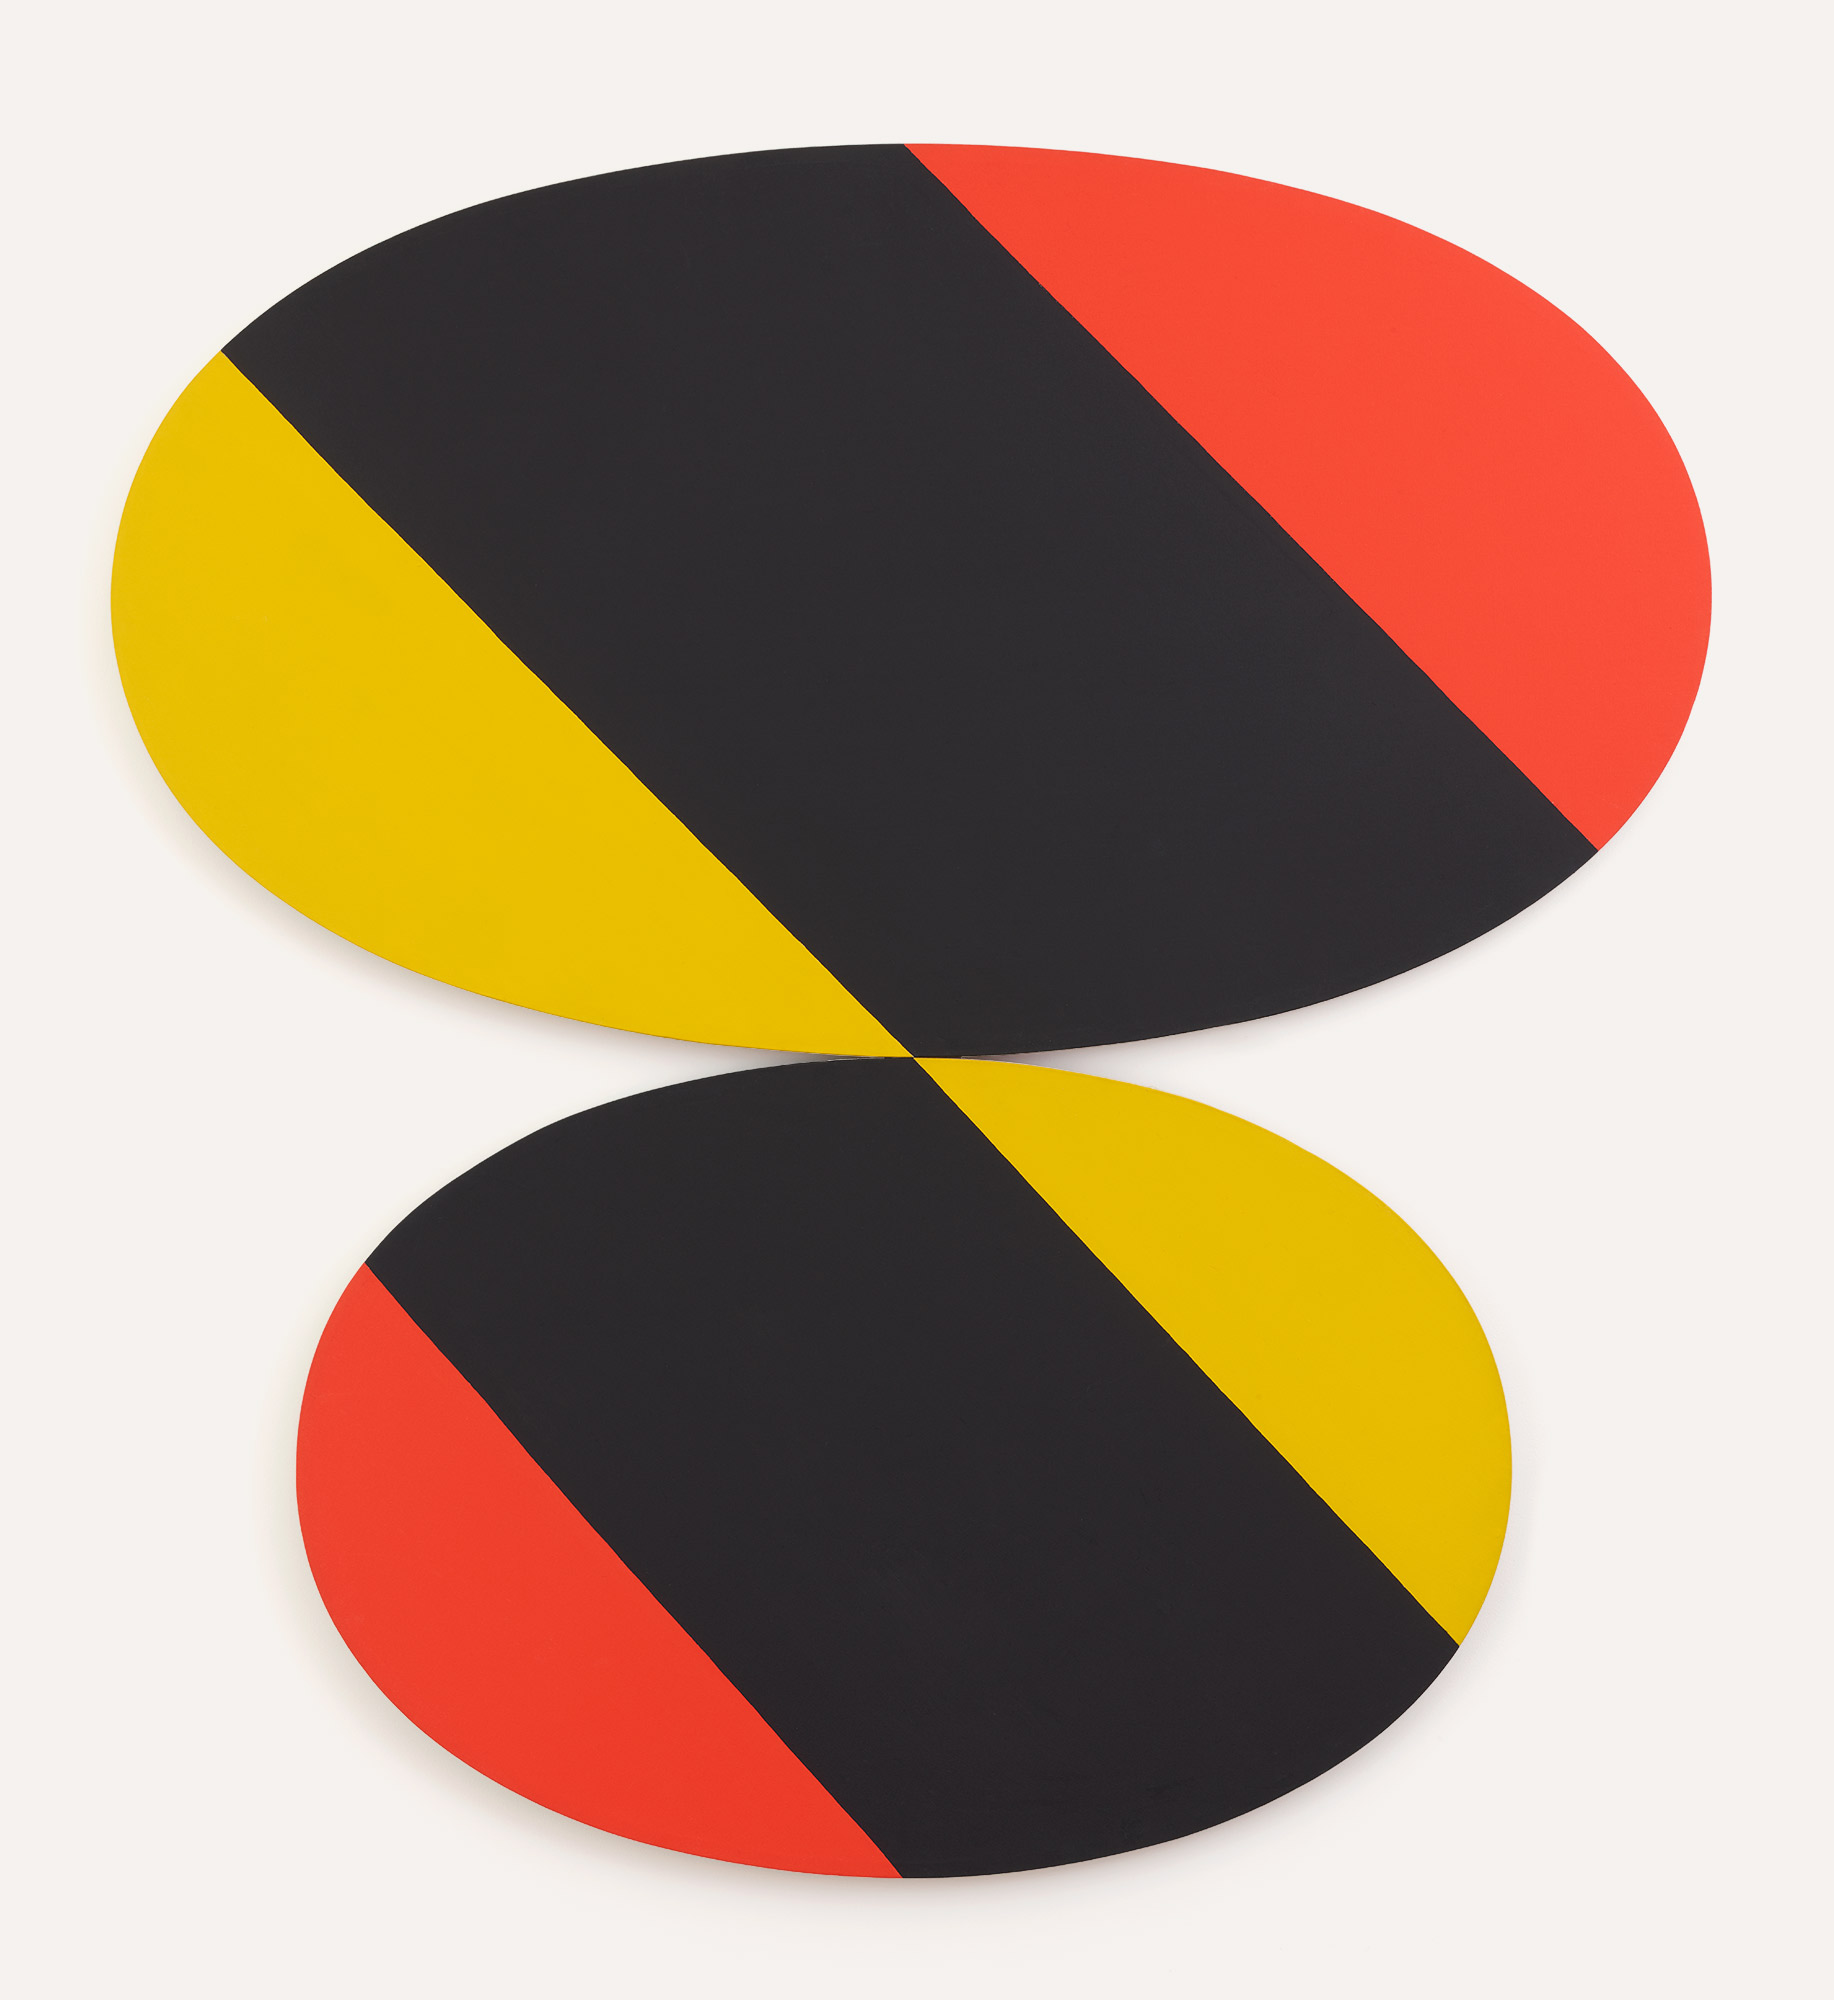 Two oval canvases wider than tall, the top one is larger than the bottom and is perfectly balanced one over another. diagonal shapes cut through both of the canvases forming lines from the left to bottom right. The colors are bright red (verging on orange) black, and primary yellow.